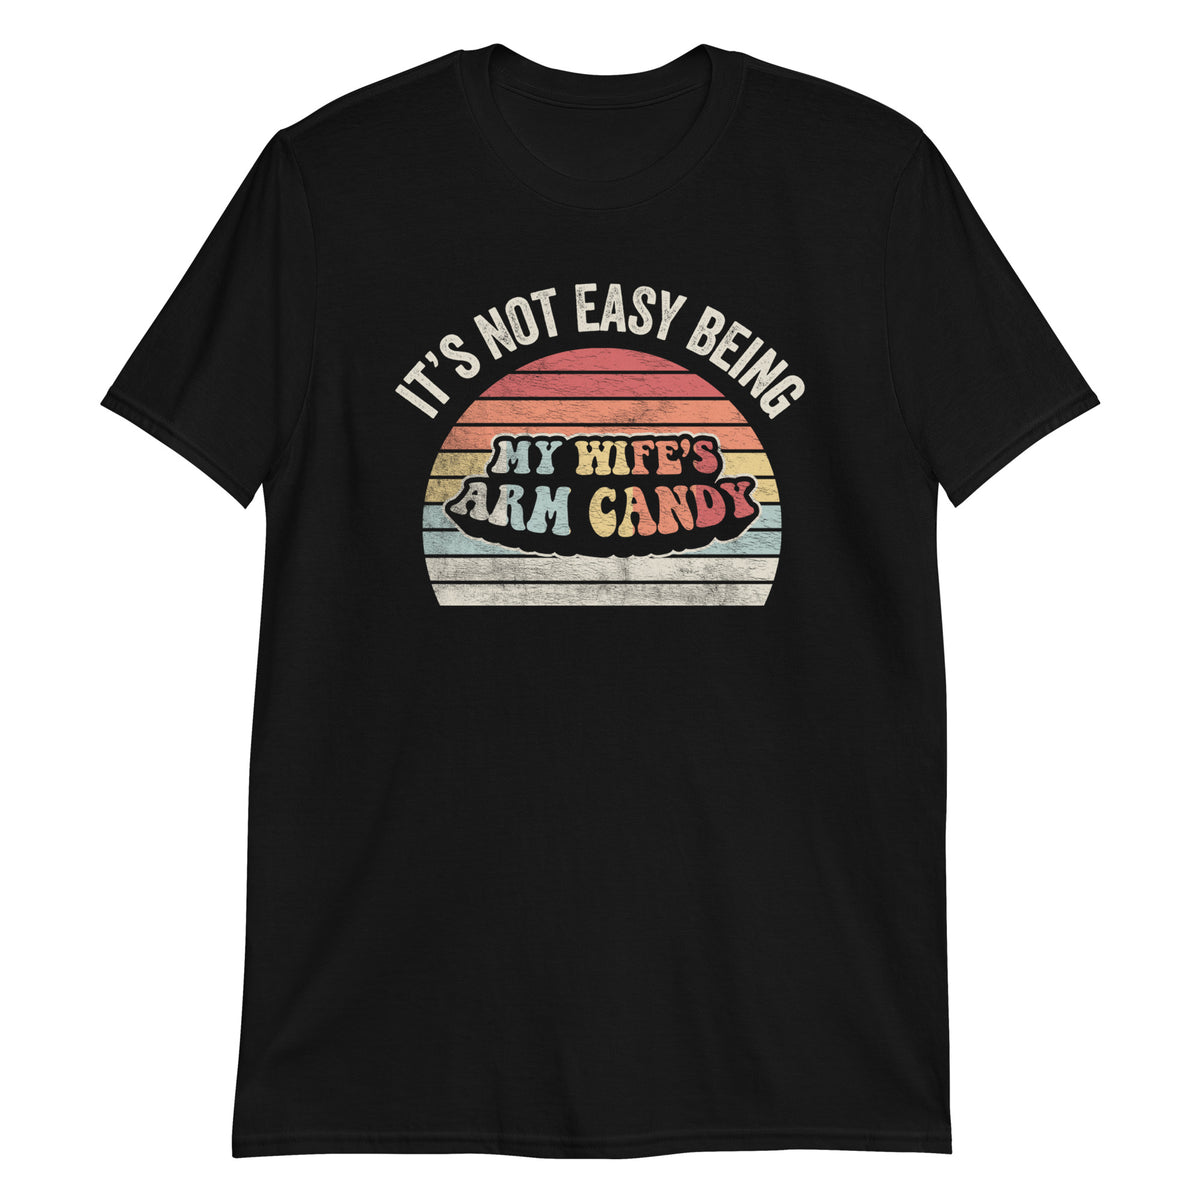 It's Not Easy Being My Wife's Arm Candy T-Shirt